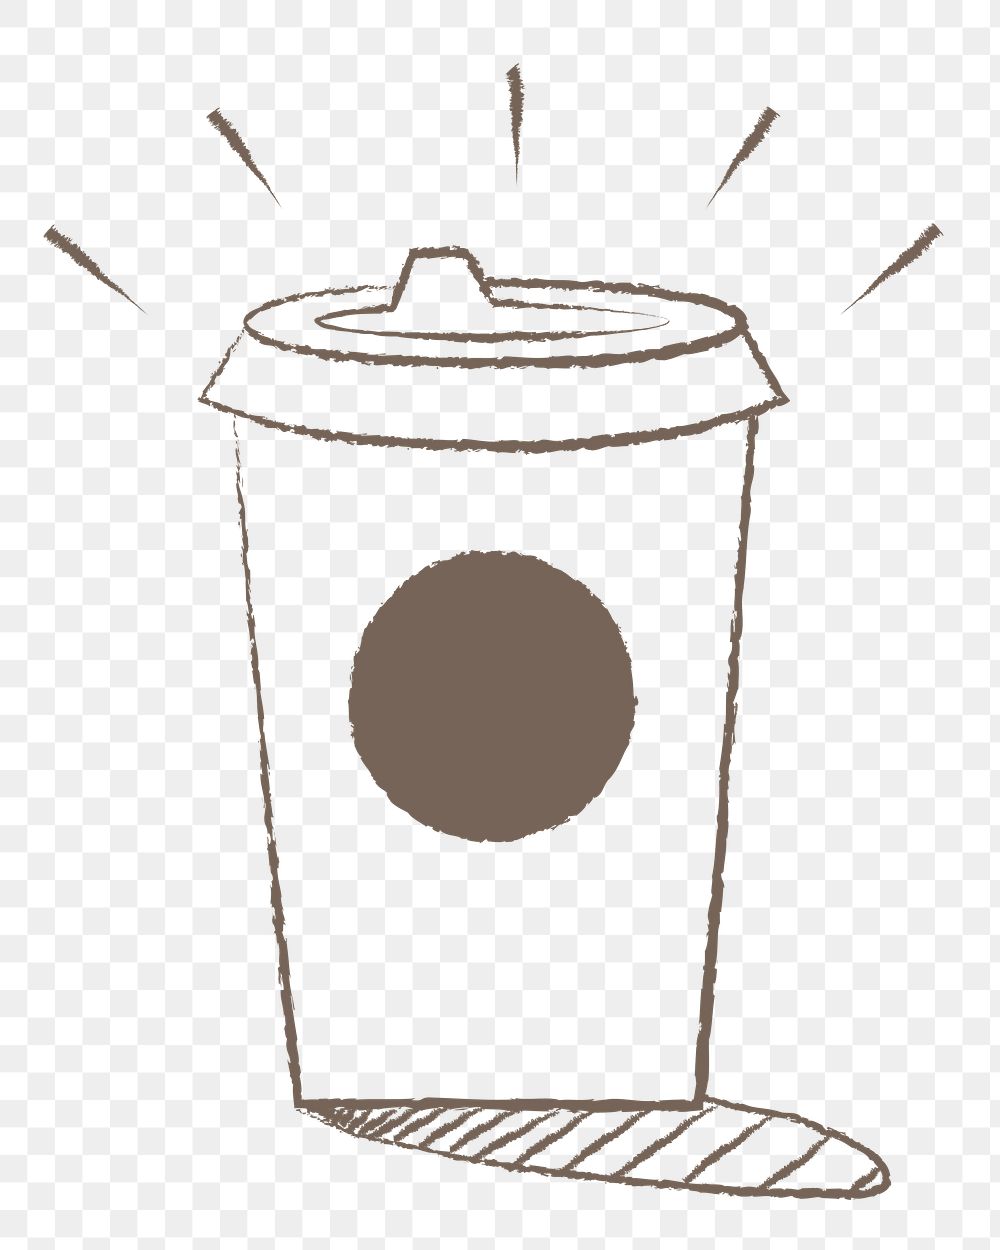 Coffee cup png sticker, cute cafe illustration